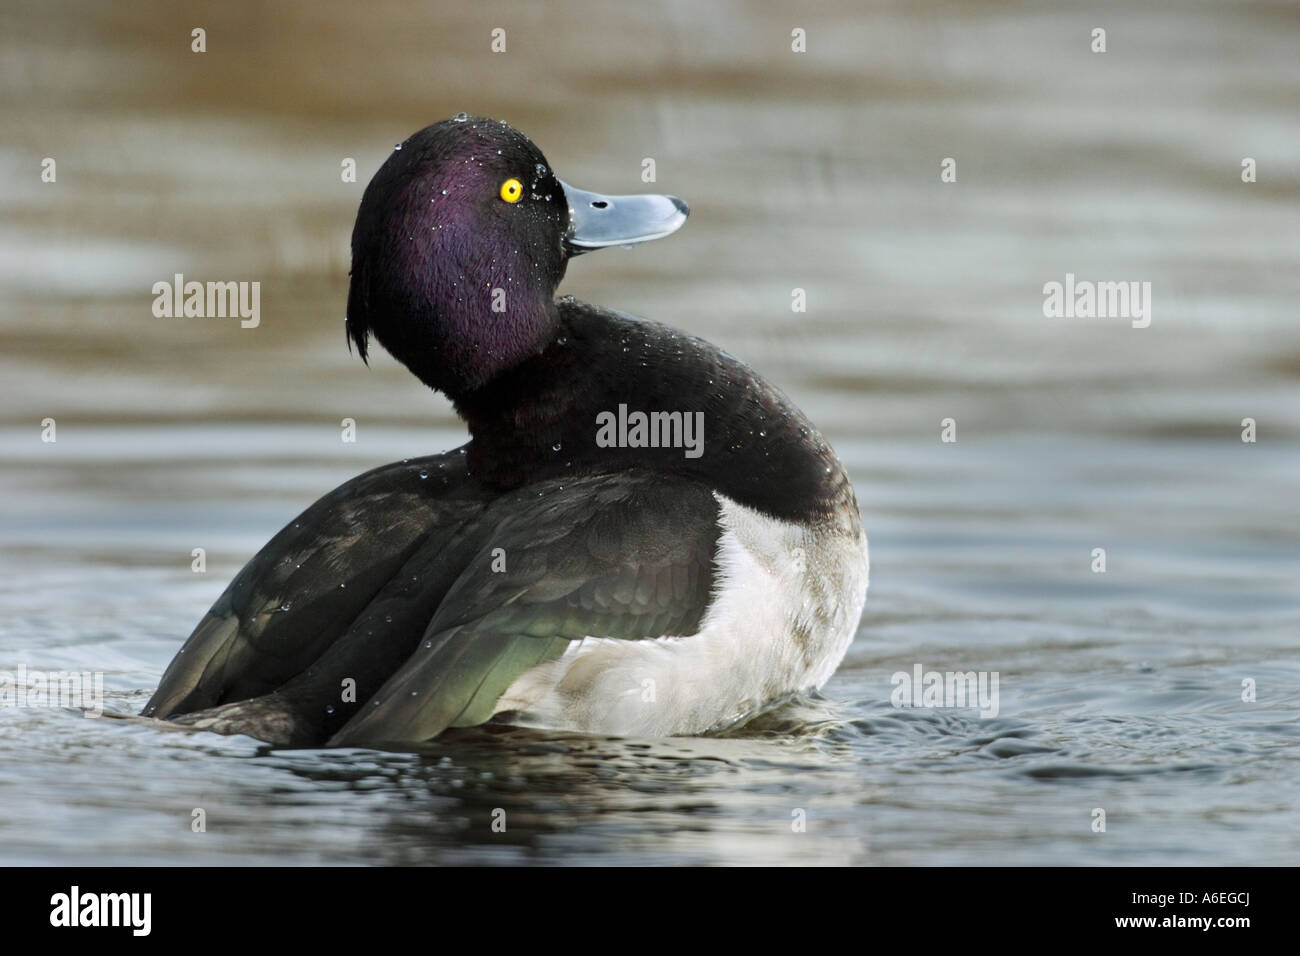 Male tufted duck preparing to flap wings on pond-rare visitor from Old world to Victoria, British Columbia, Canada. Stock Photo